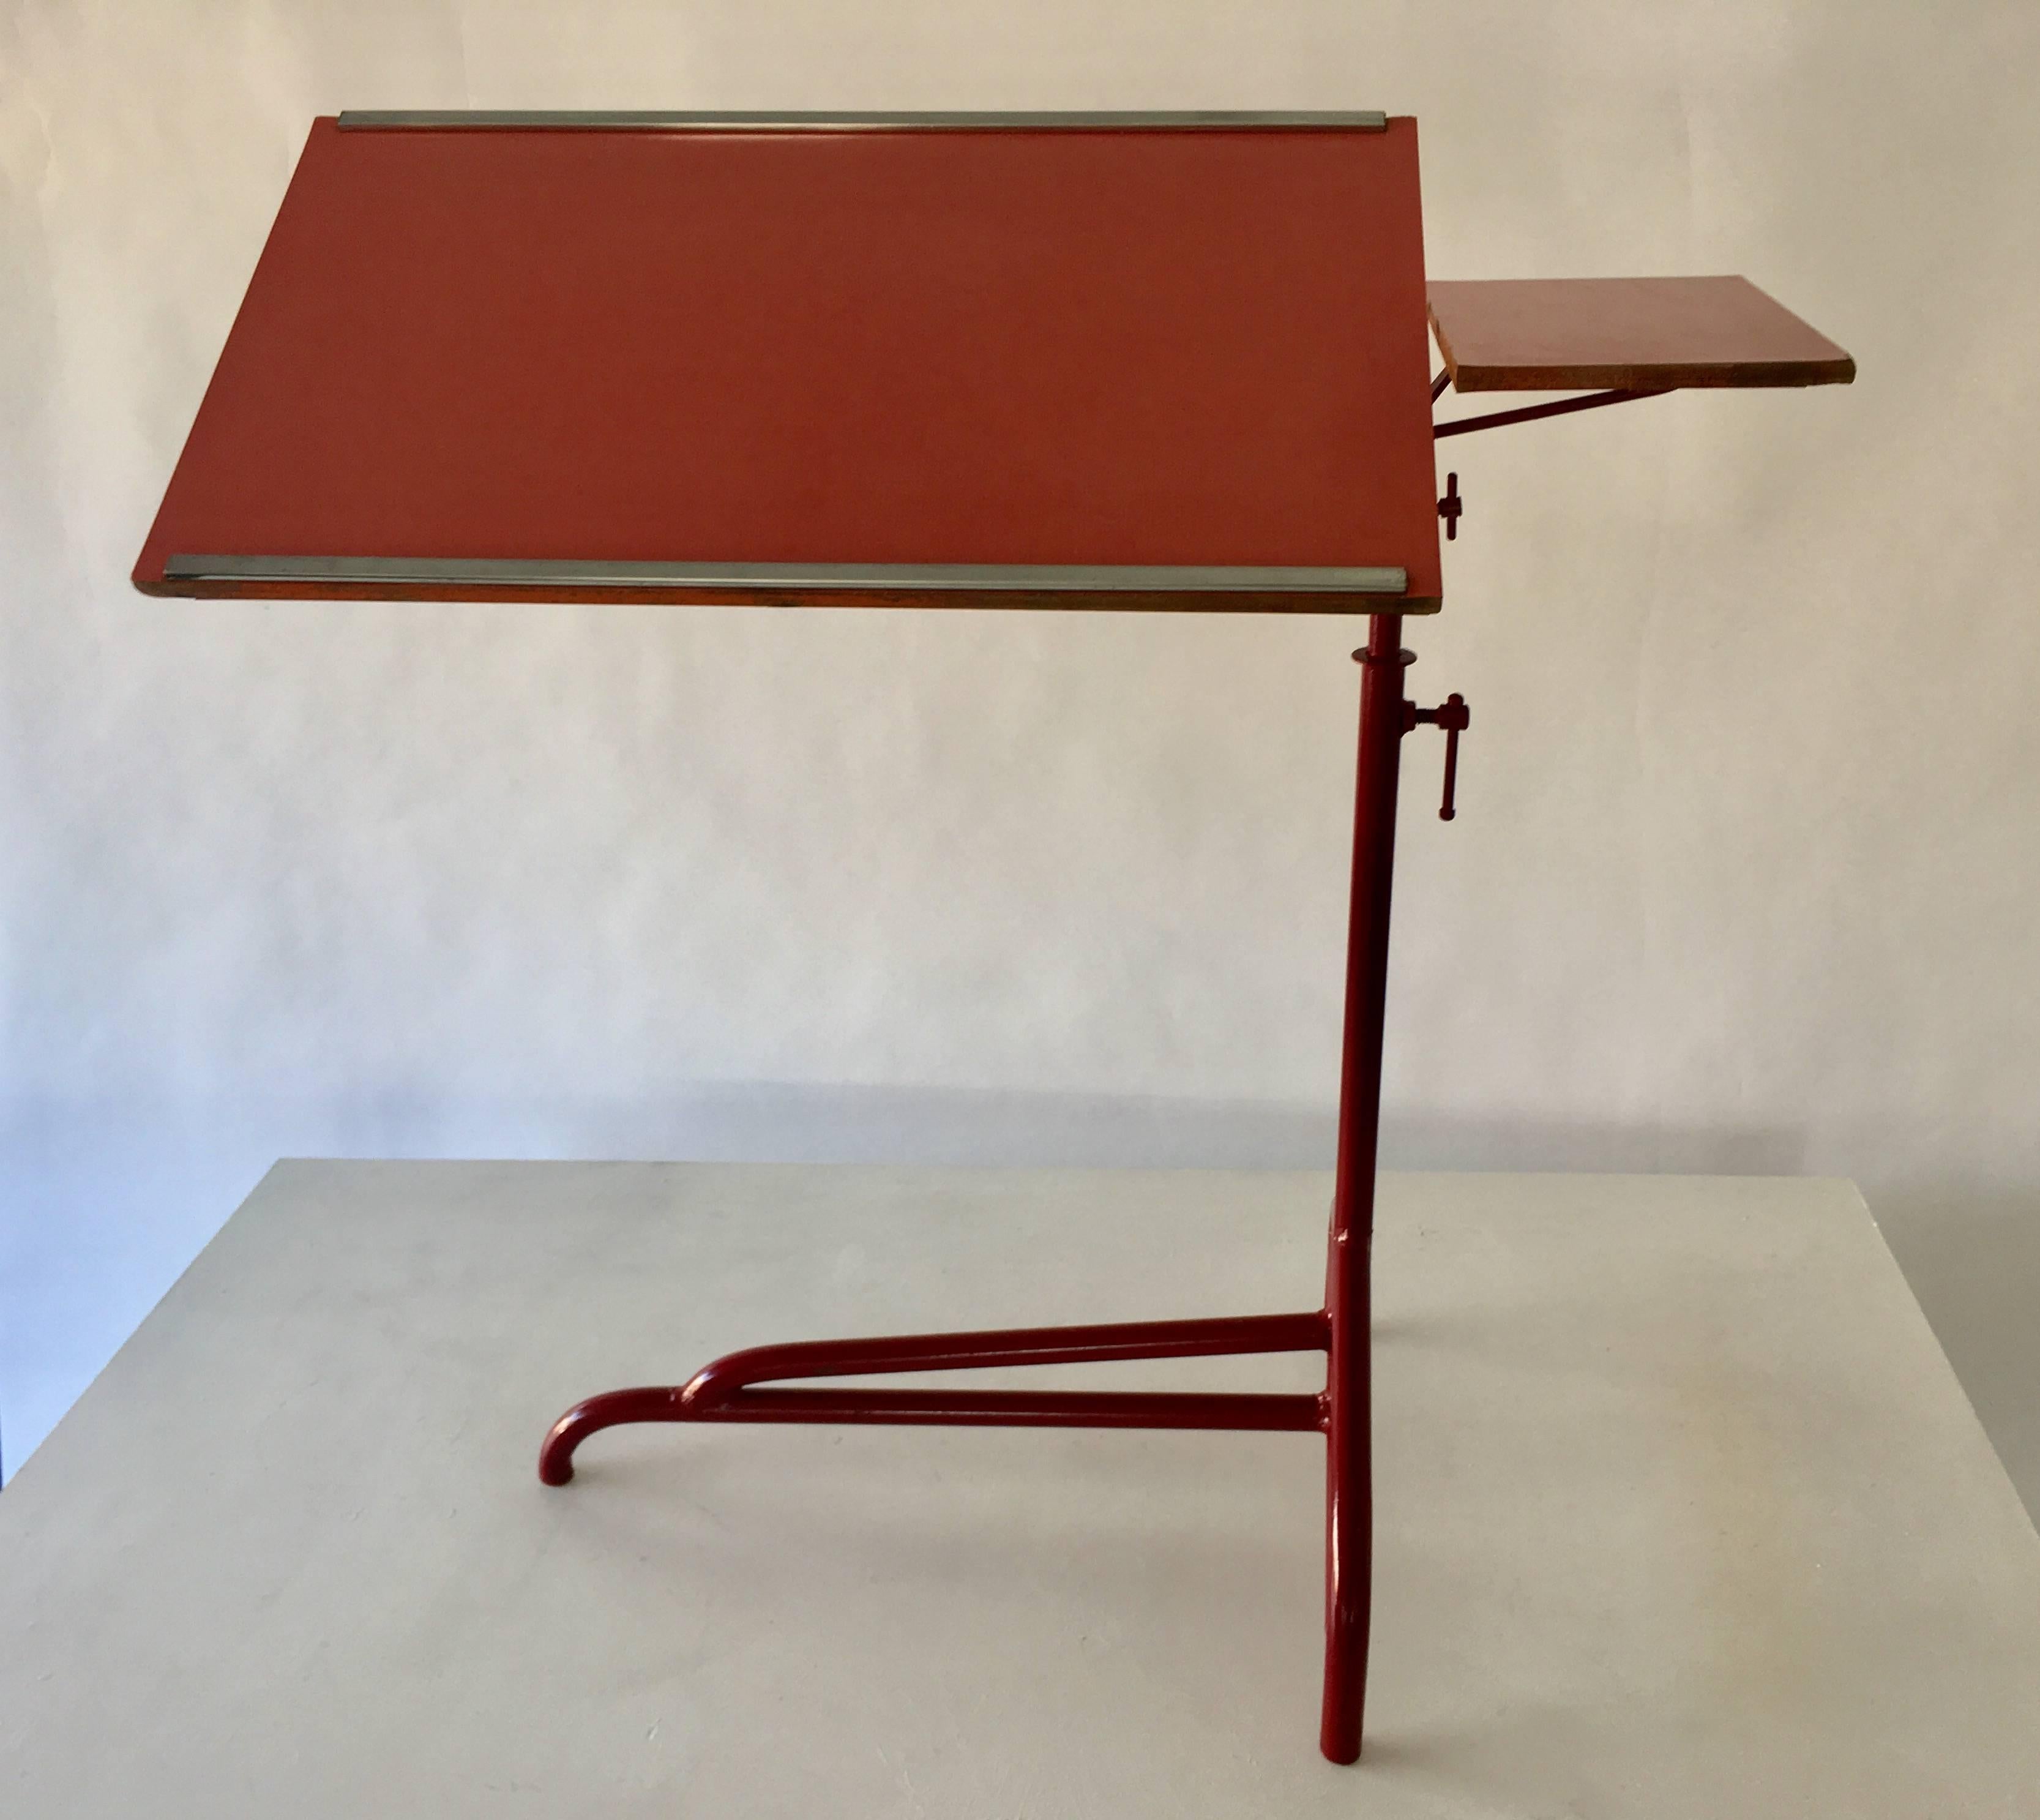 Jean Prouvé reading table for Martel de Janville Sanatorium, Plateau d'Assy, France, 1936. Enameled steel, laminate over wood, and chrome-plated steel. Table height can be adjusted up 20 inches higher.

Provenance: Martel de Janville Sanatorium,